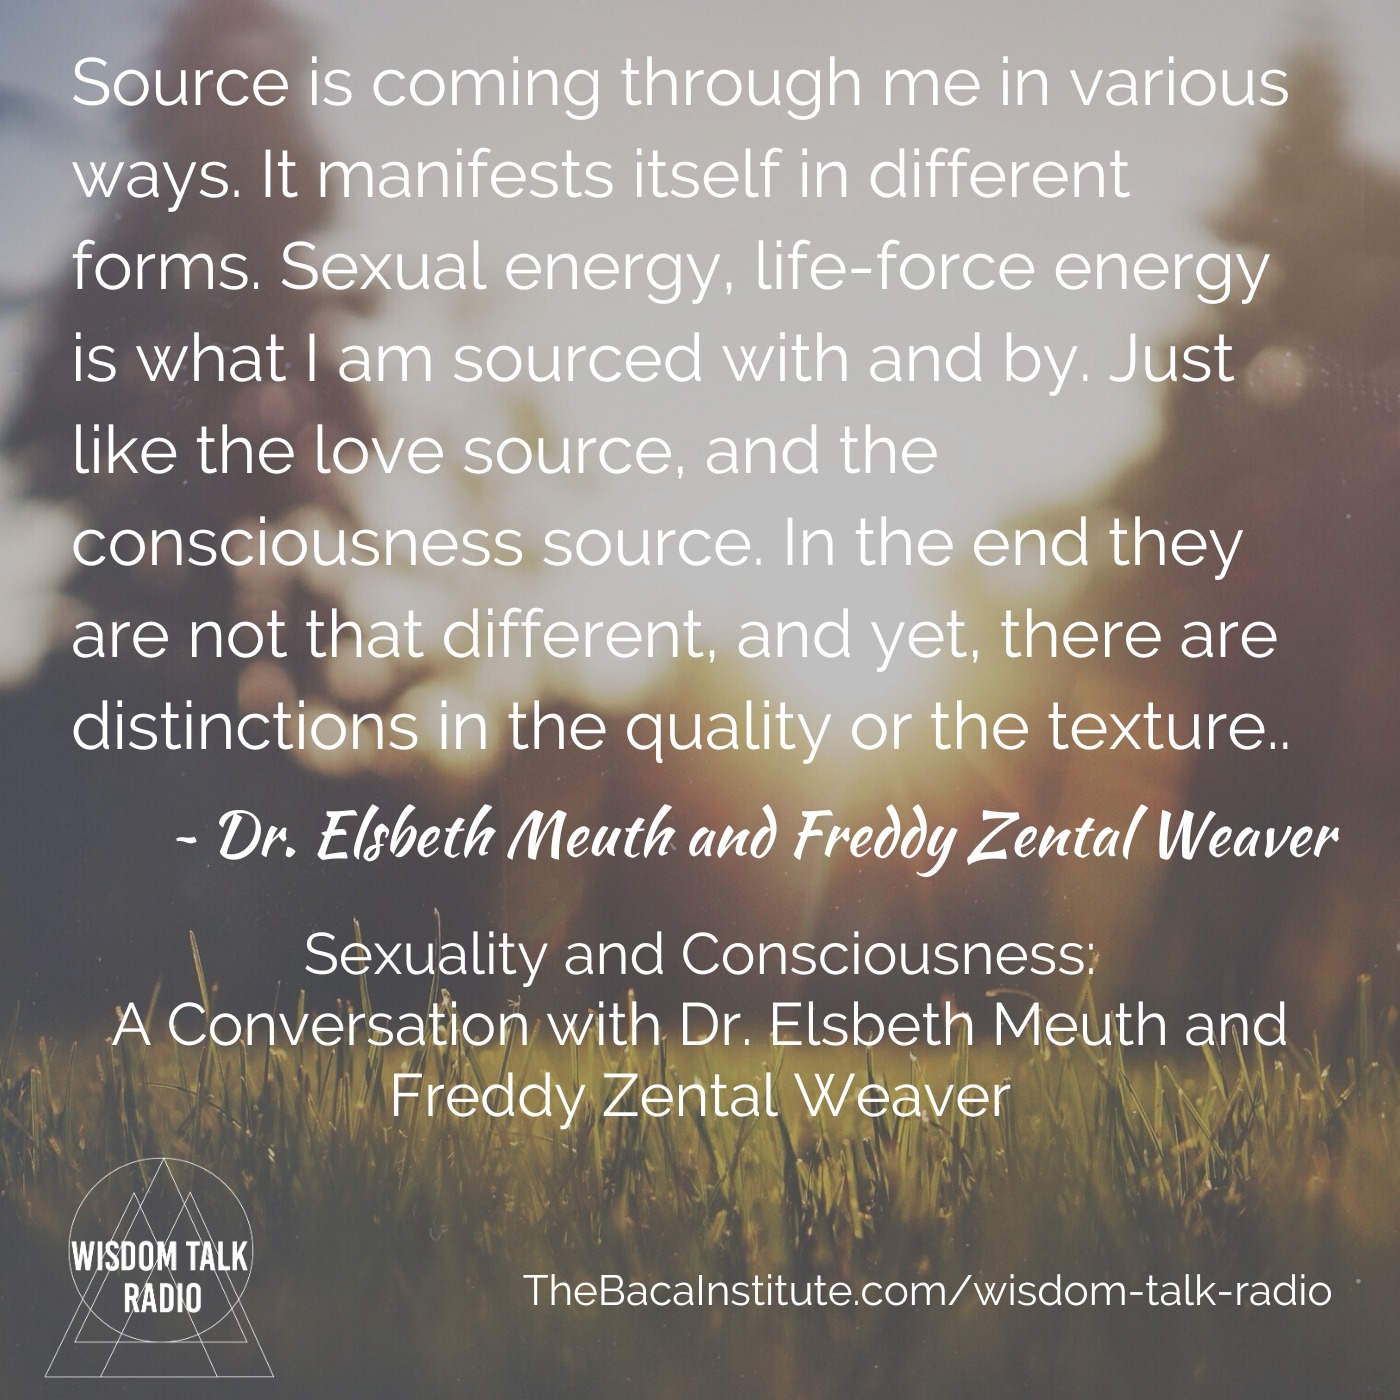 Sexuality and Consciousness: a Conversation with Elsbeth Meuth and Freddy Zental Weaver